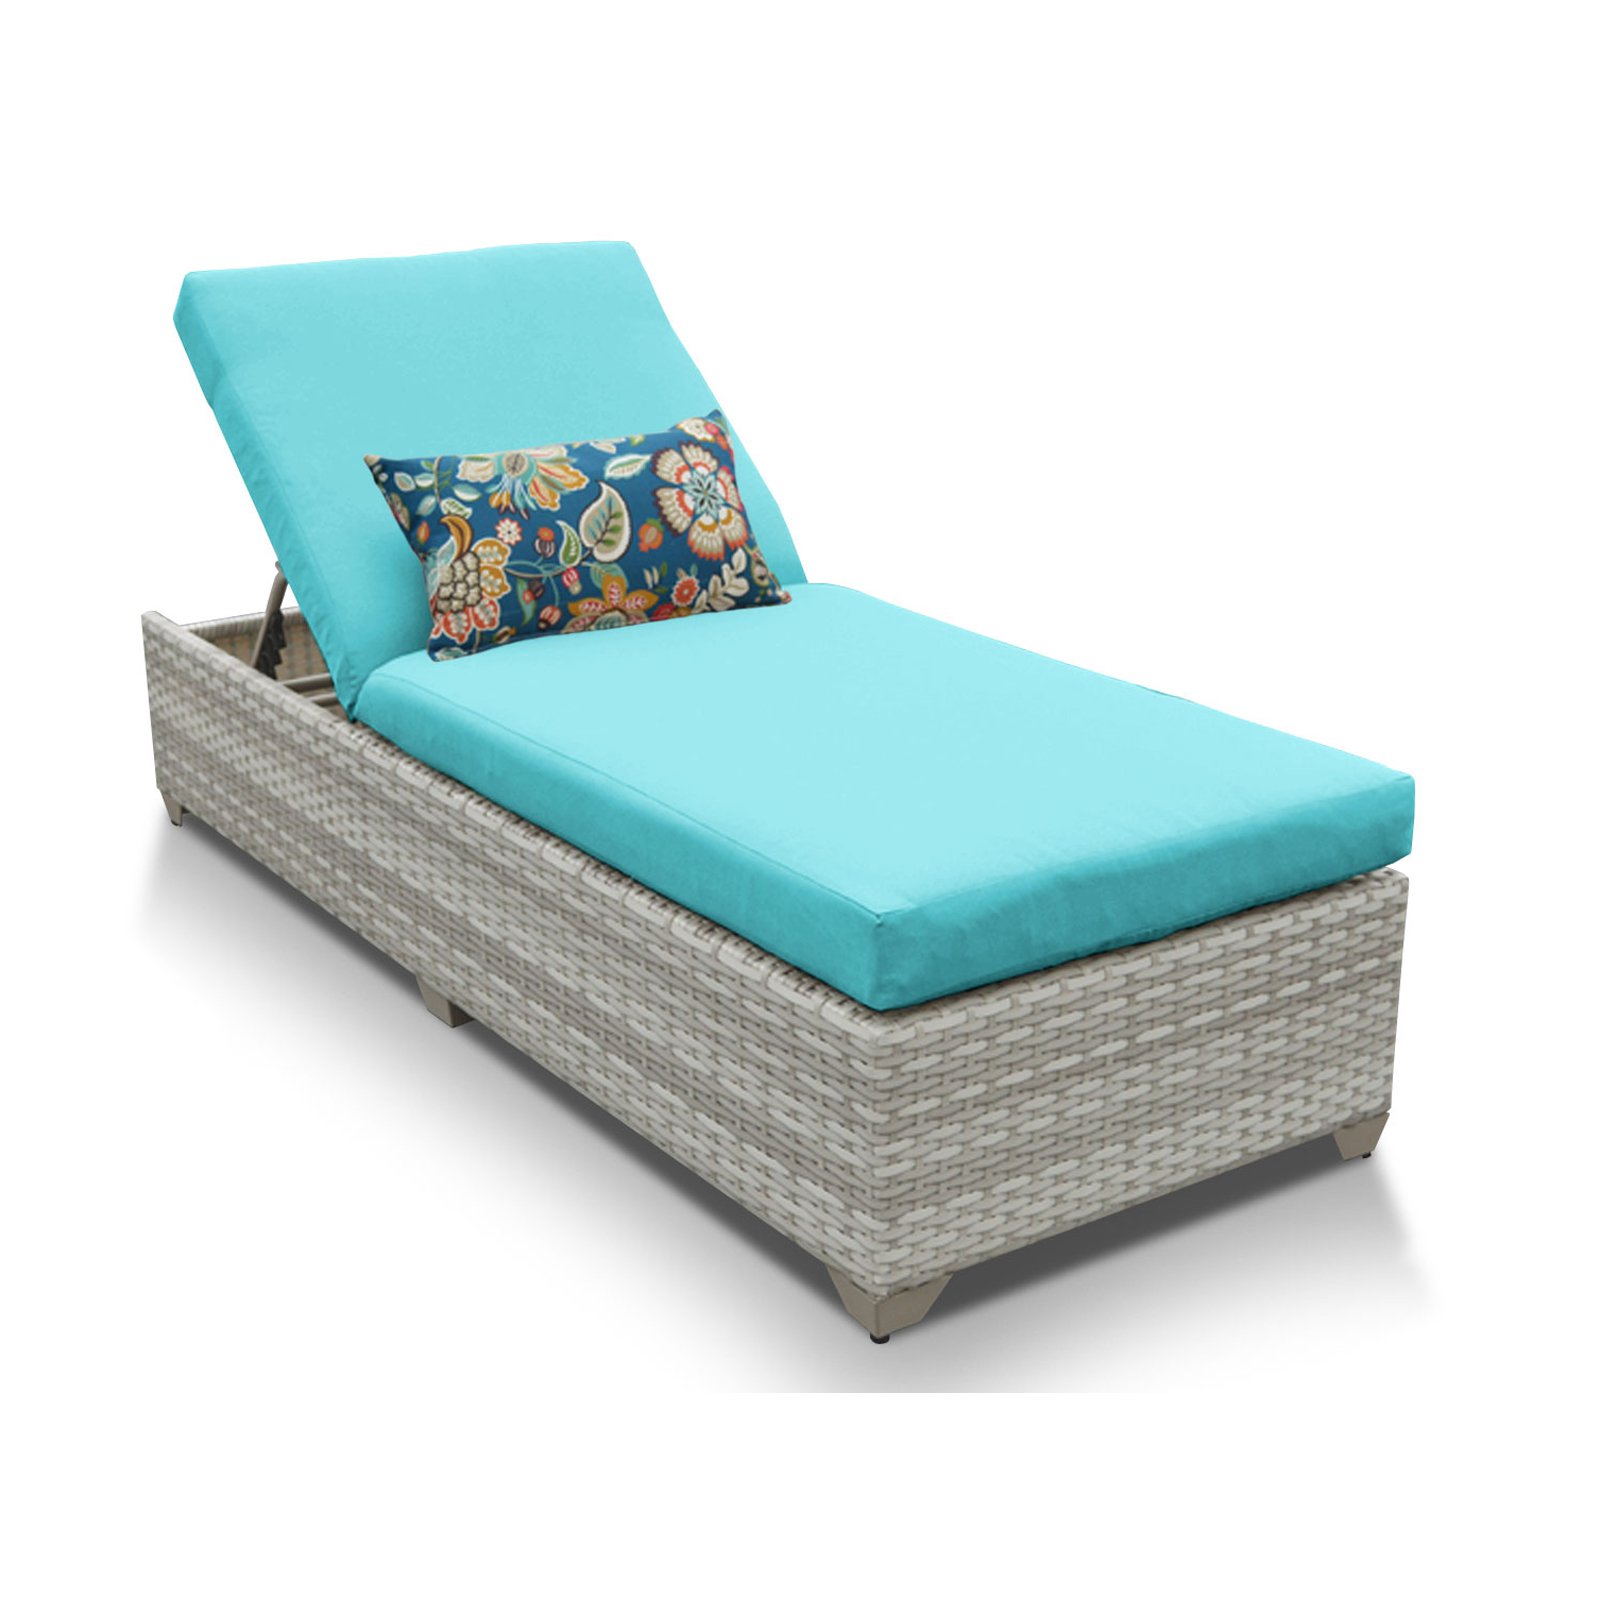 TK Classics Fairmont All-Weather Wicker Adjustable Chaise Lounge - image 2 of 2